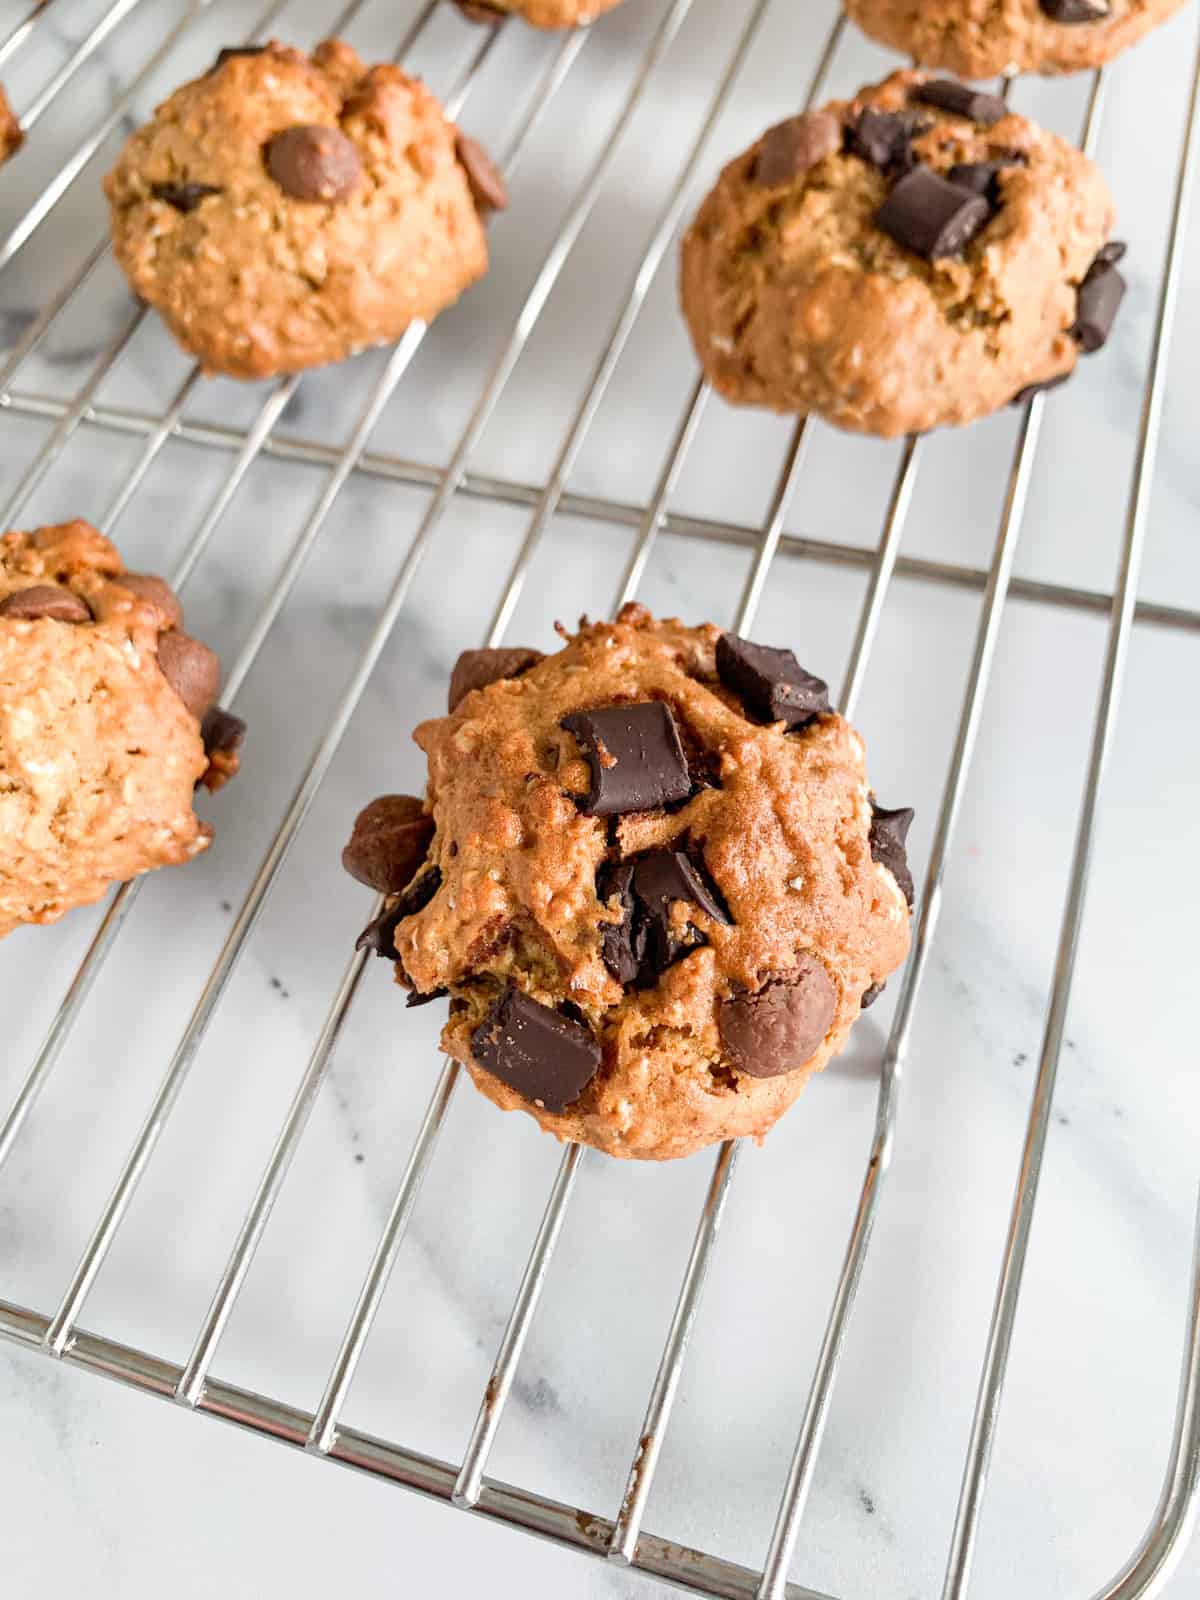 Healthy chocolate chip cookies on a stainless steel rack